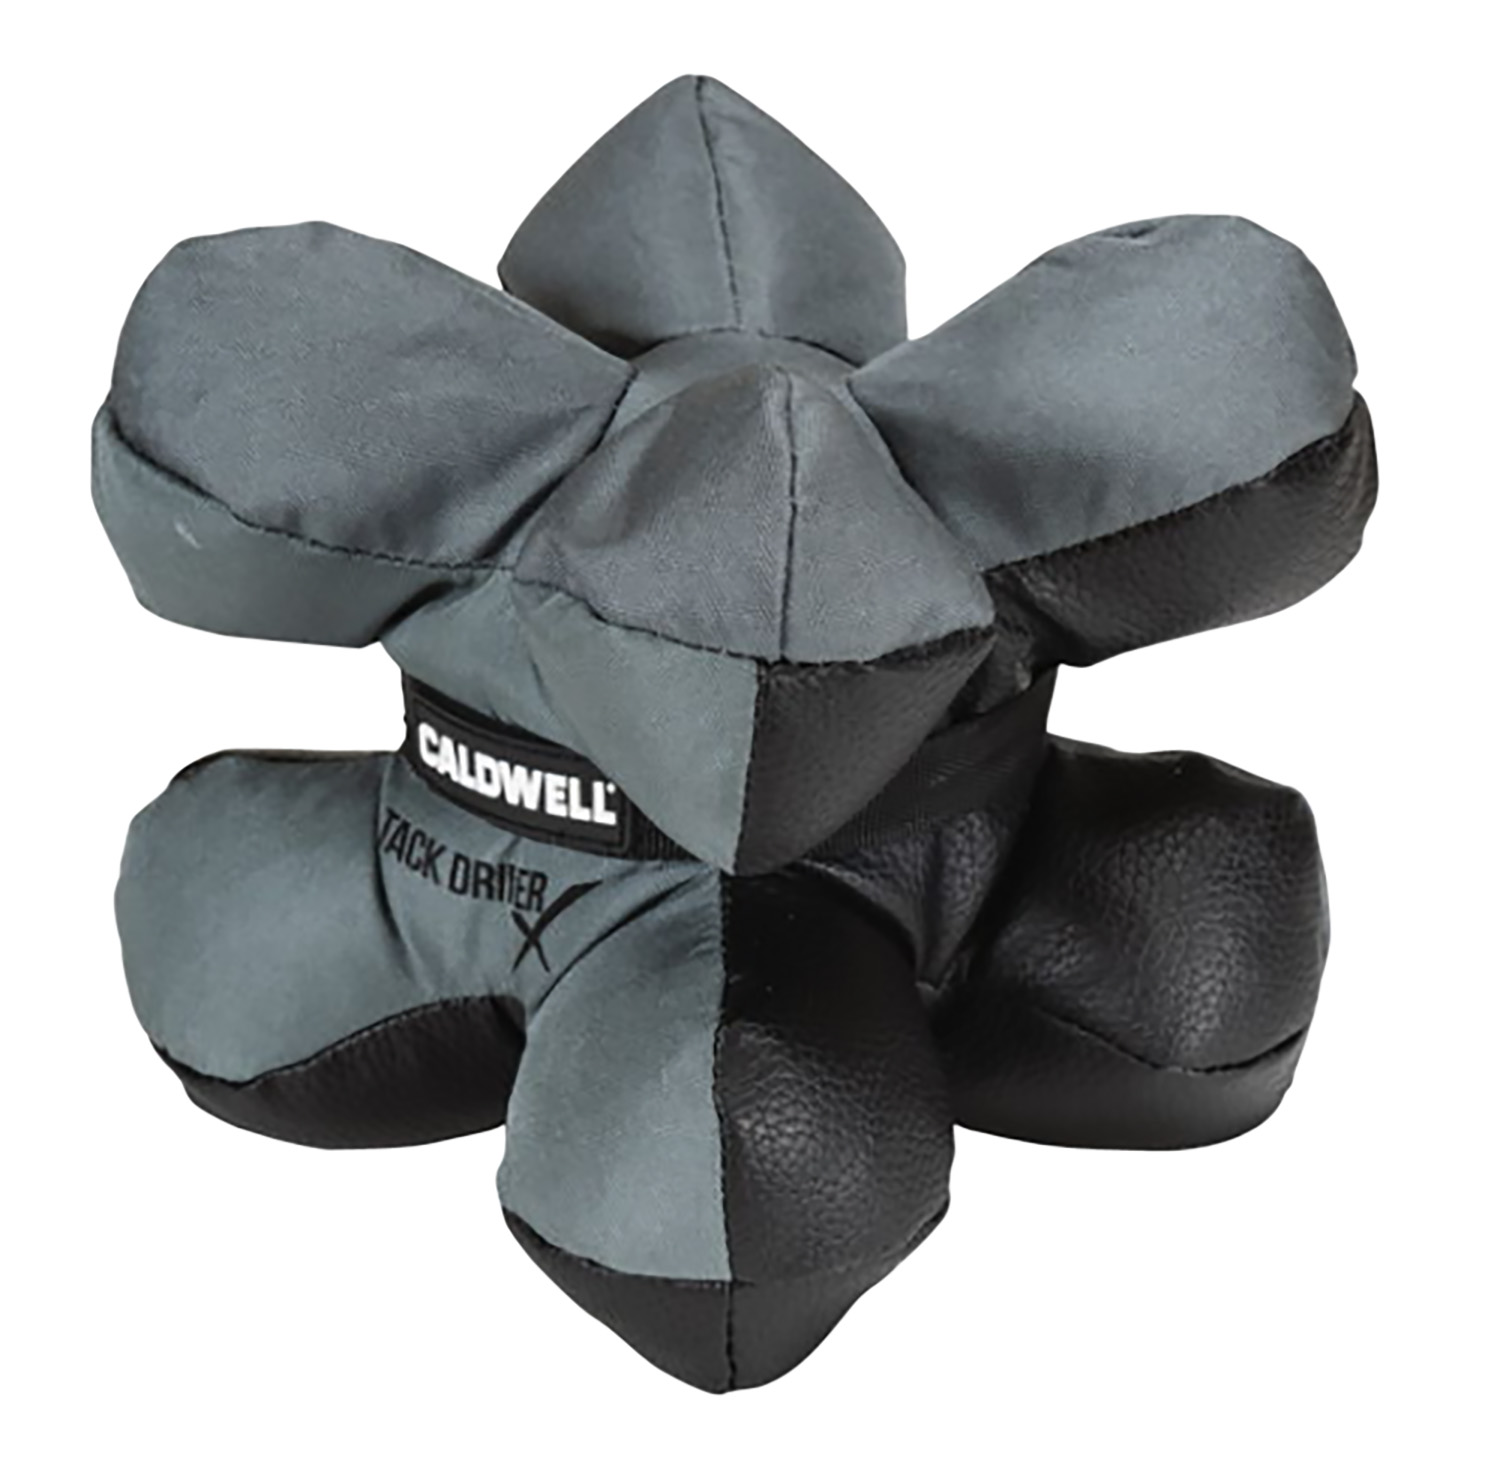 Caldwell 1102665 Tack Driver X with Gray & Black Finish, Rubber Bottom, Plastic Pellet Filled, 6.50 lbs & 8